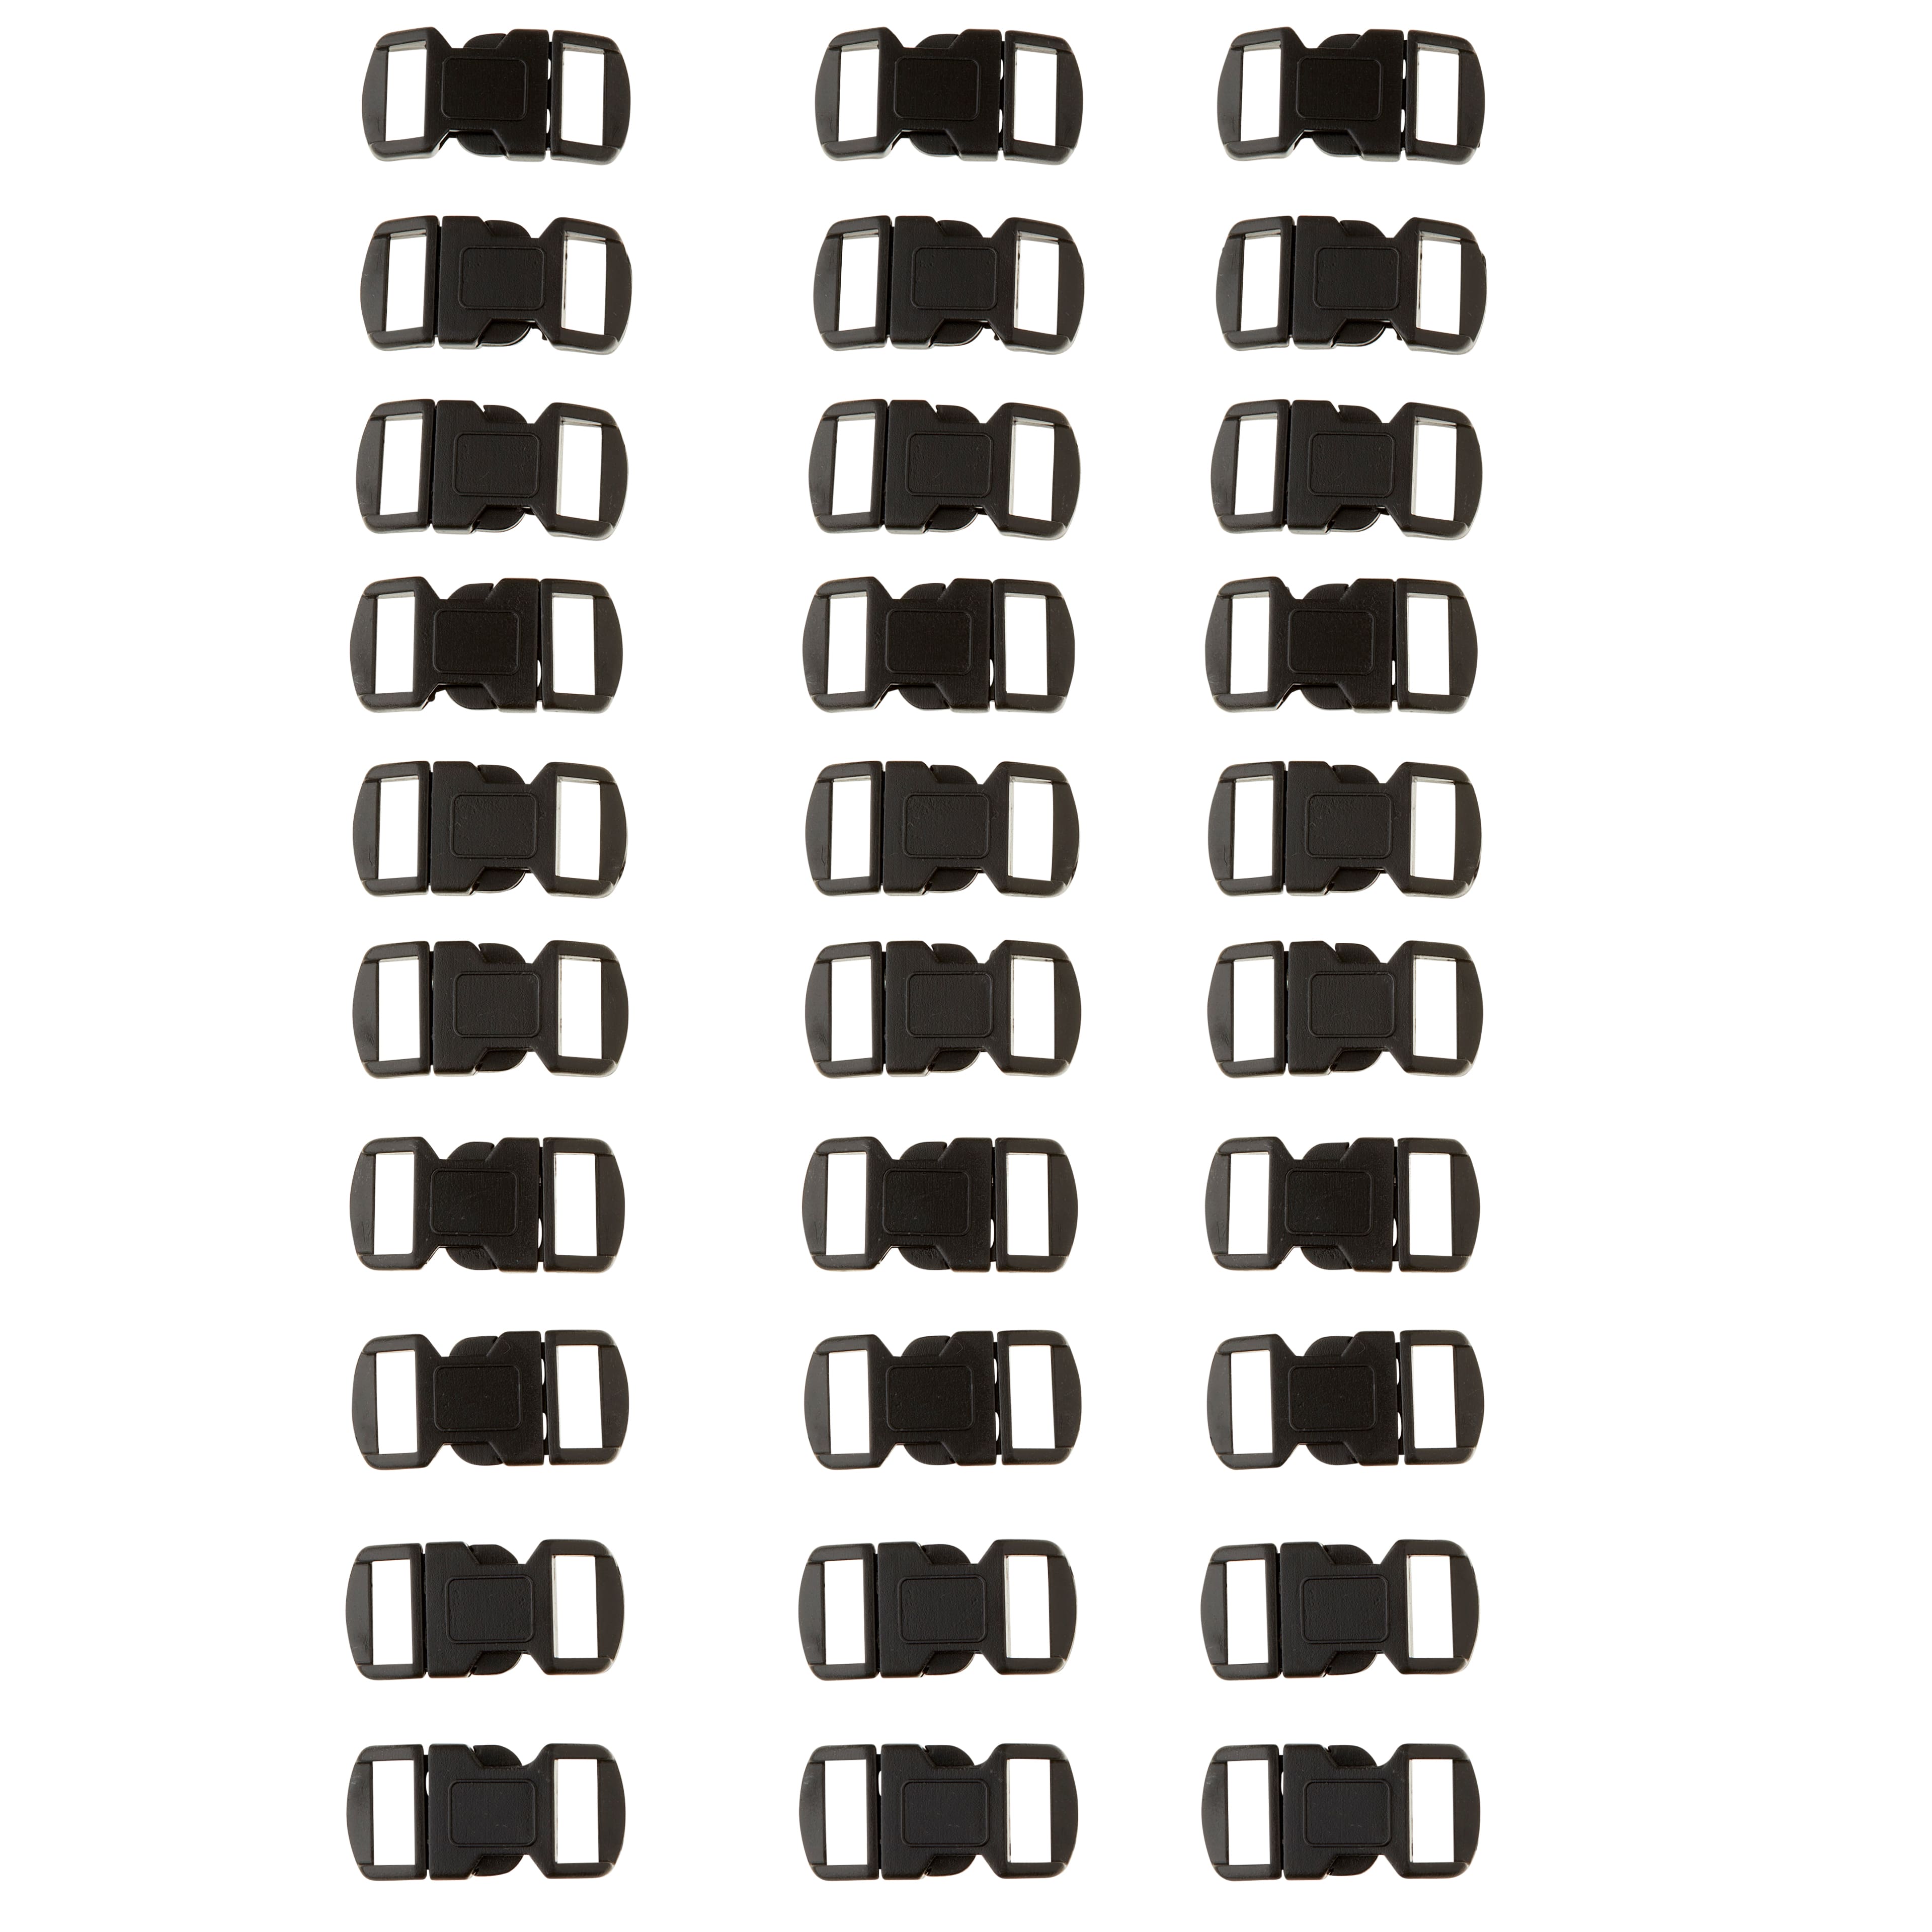 Parachute Cord Buckles, 12mm, Value Pack